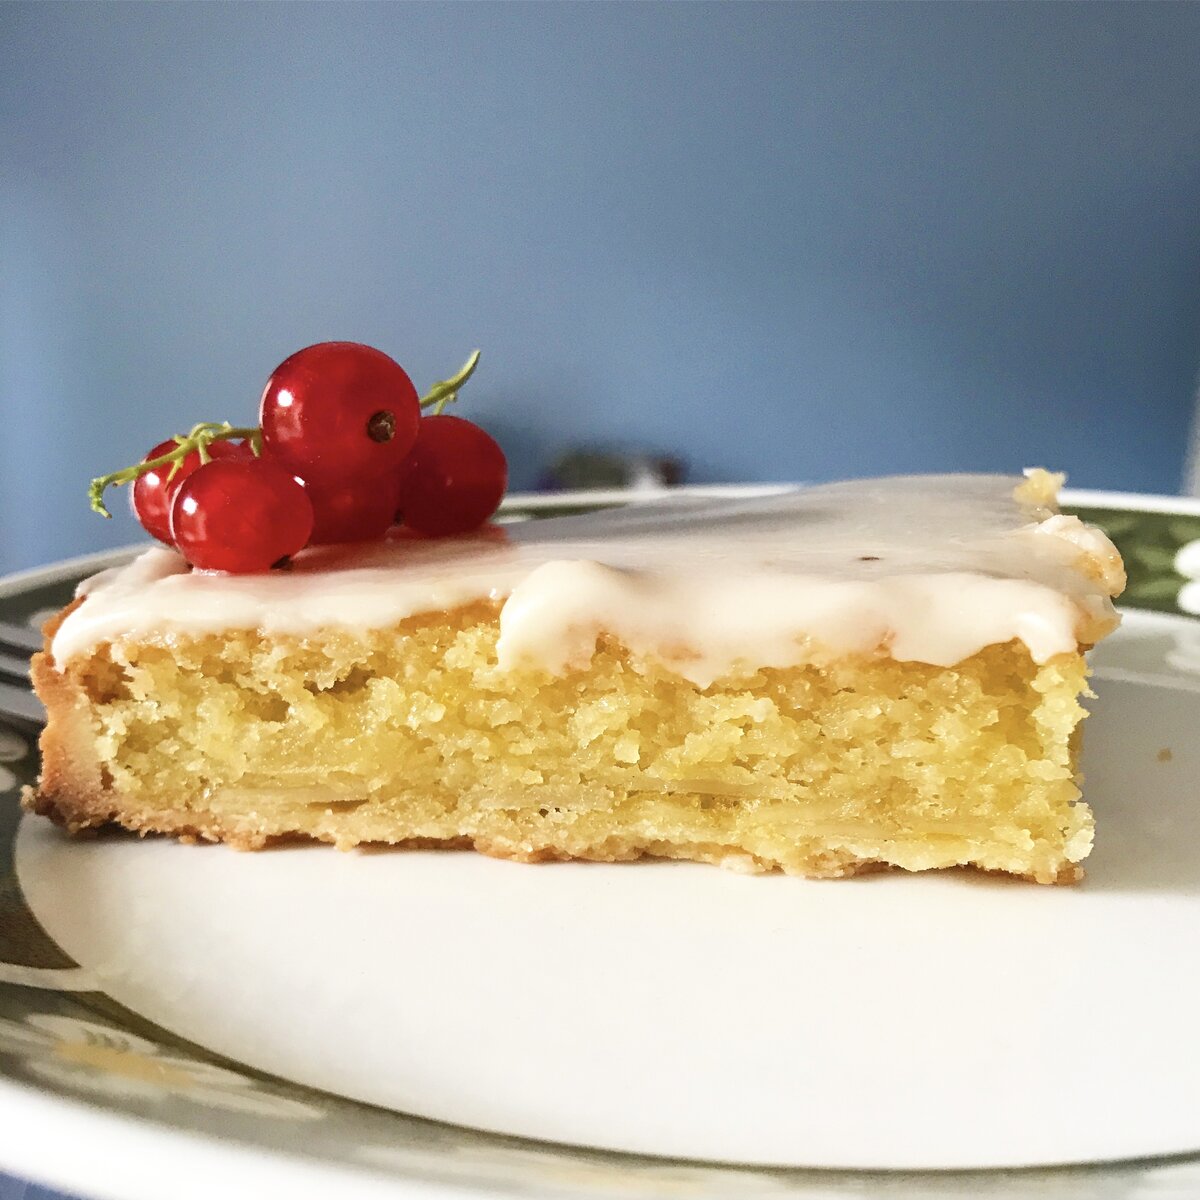 slice of almond cake topped with rum glaze and redcurrants